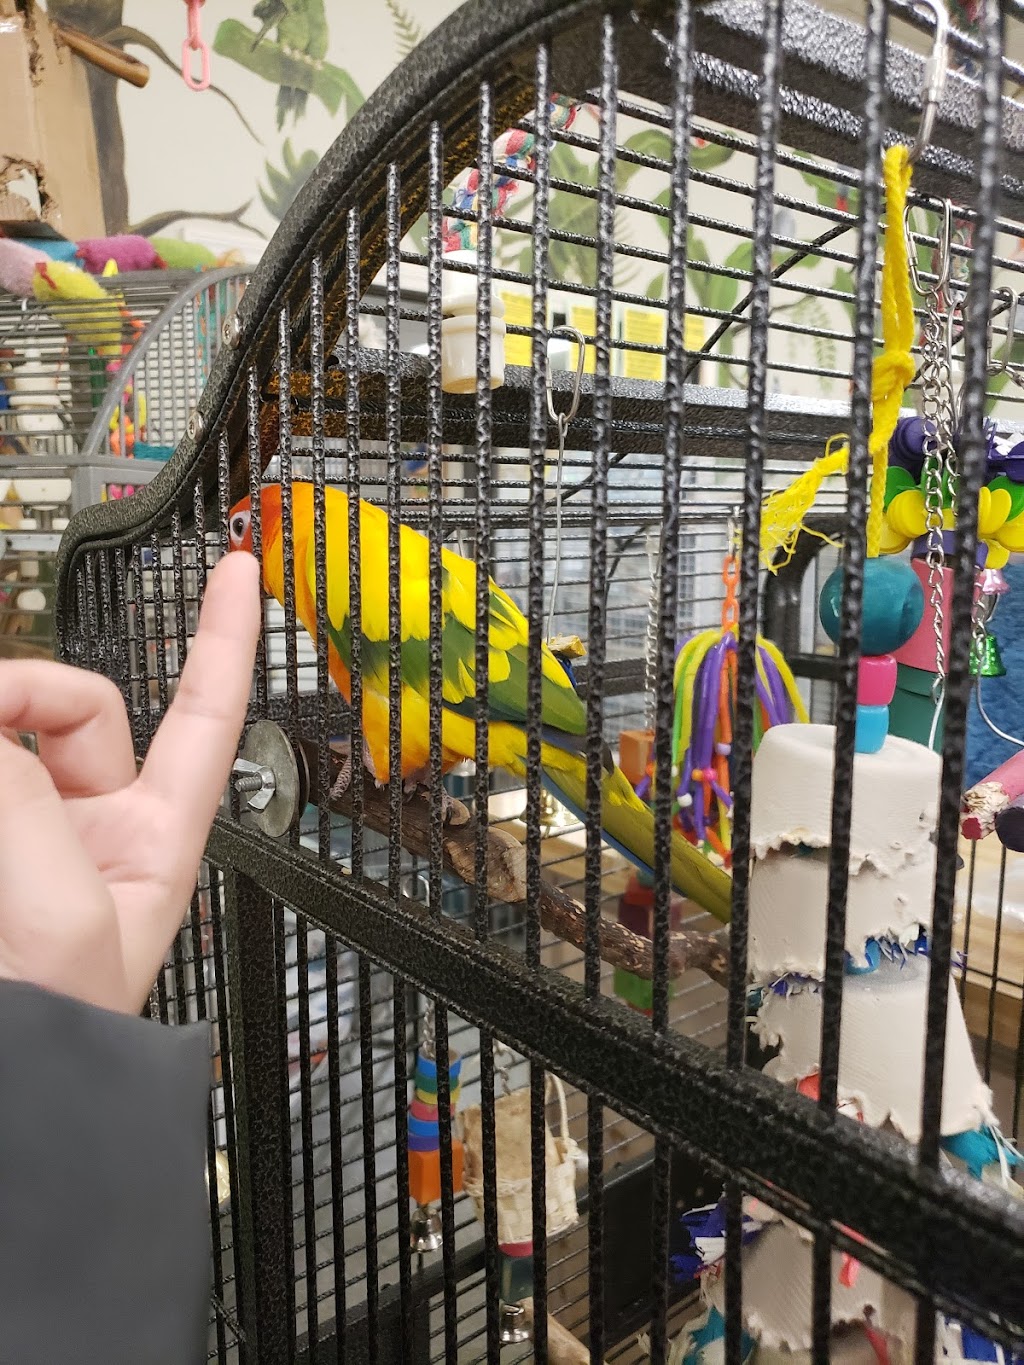 Bird & Reptile Connection | 2245 Providence Hwy # 4, Walpole, MA 02081 | Phone: (508) 668-0805